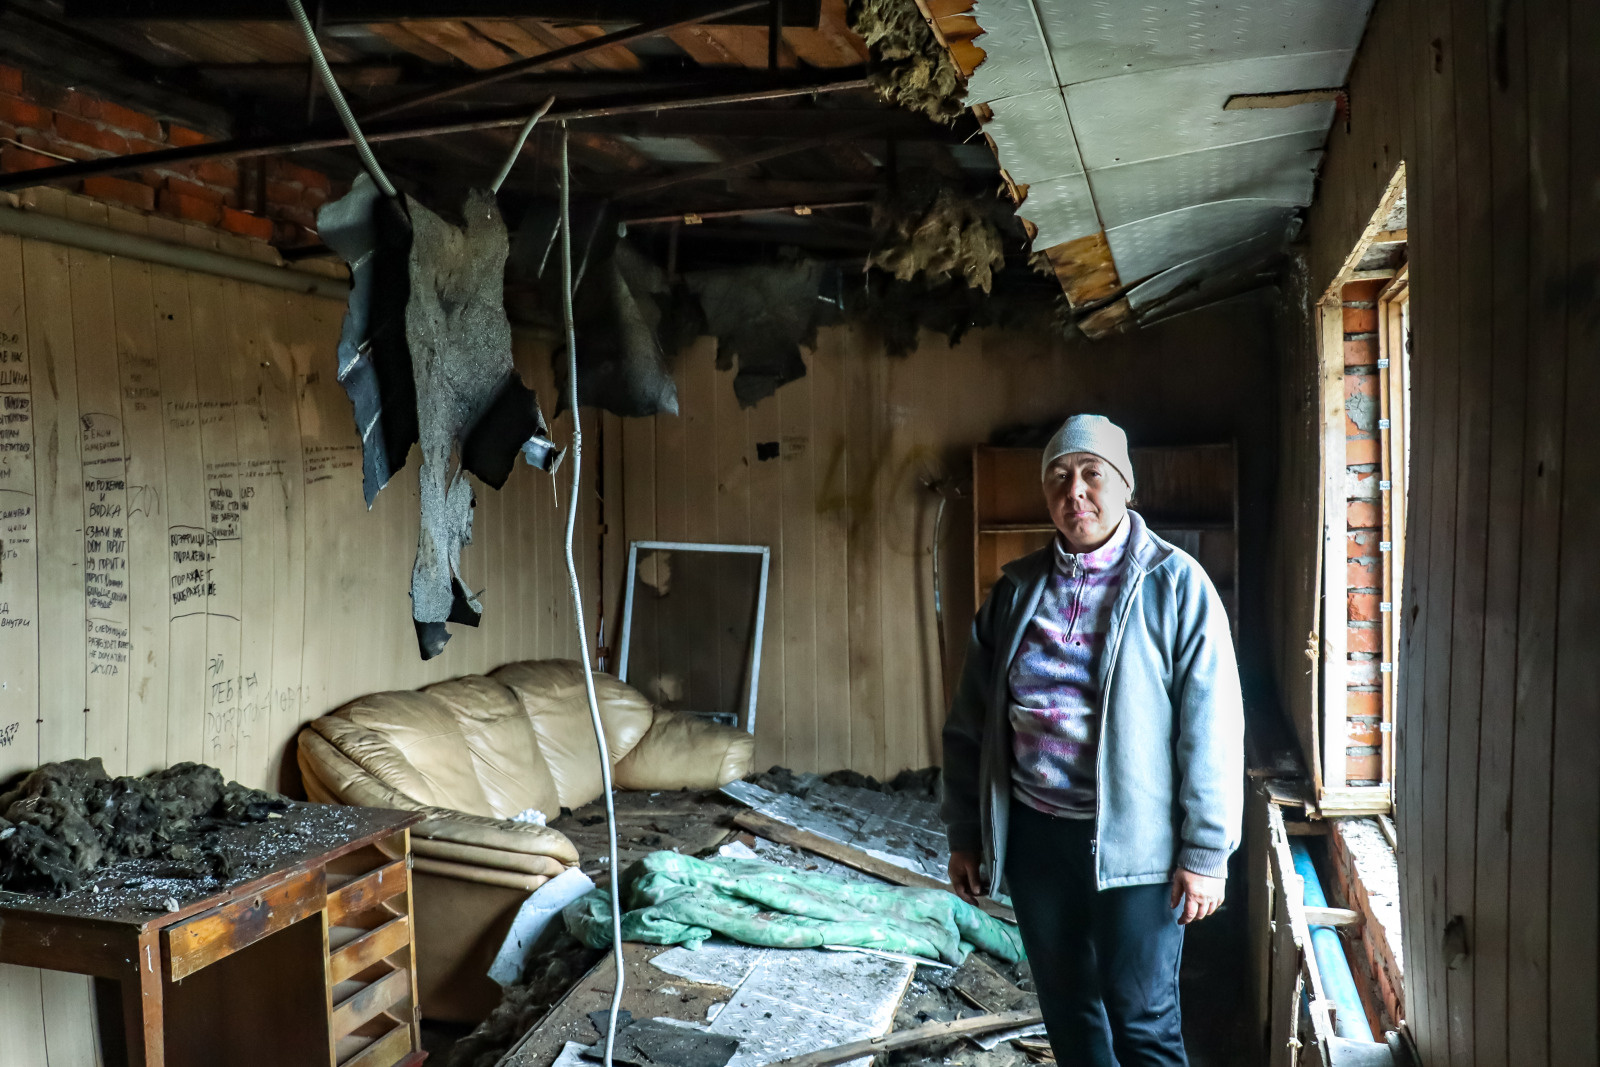 A woman wearing a coat and hat stands in a room in a destroyed building. The ceiling is falling in.